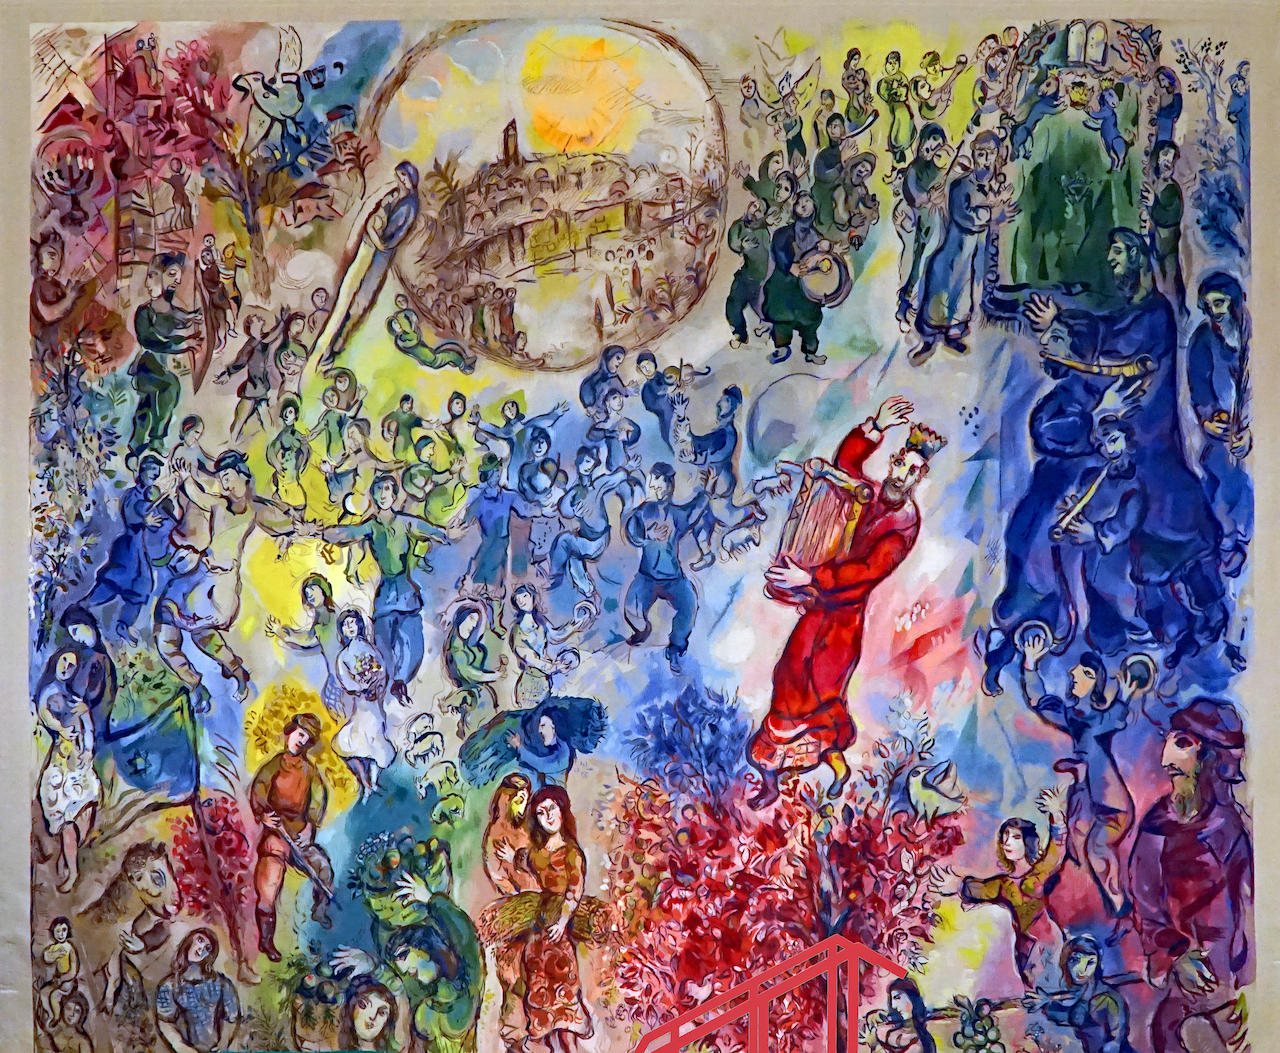 Marc Chagall. Revival des Staates Israel. 1965. Wandteppich. 5,50 x 4,80cm. im Chagall-Saal im Knesset